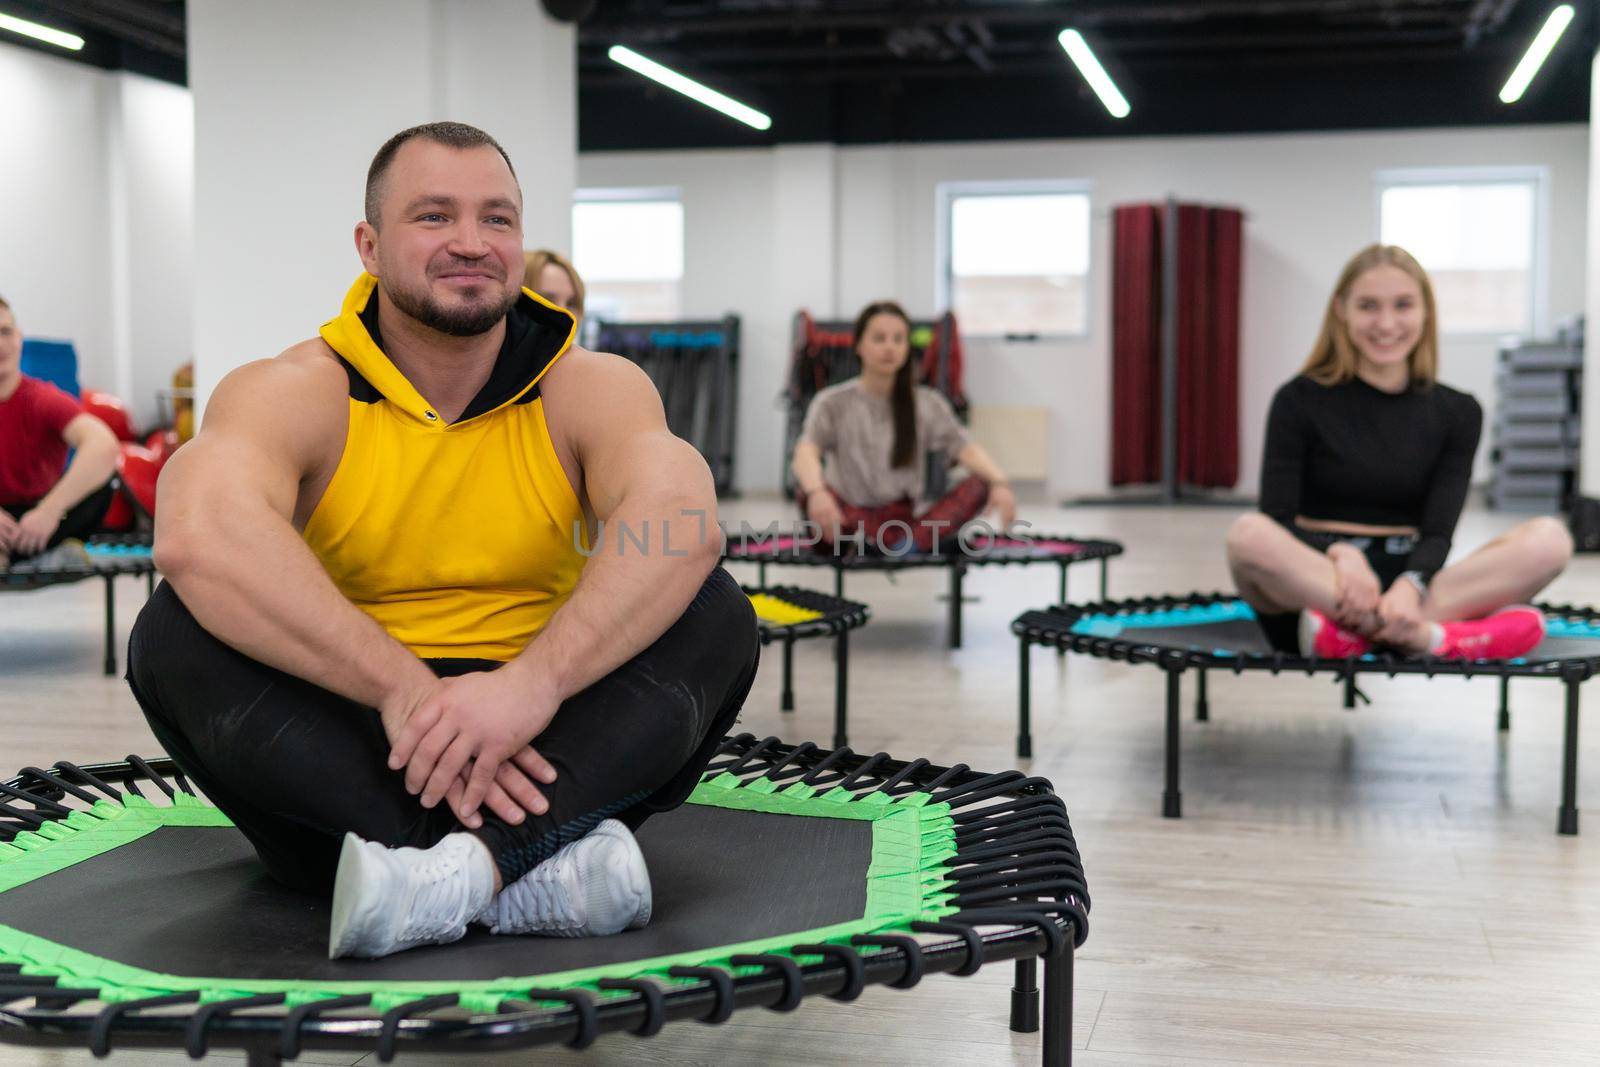 Women's and men's group on a sports trampoline, fitness training, healthy life - a concept trampoline group batut workout men, from lifestyle athletic for sporty from sport shaping, smiling sportswear. Legs beauty loss, exercising by 89167702191